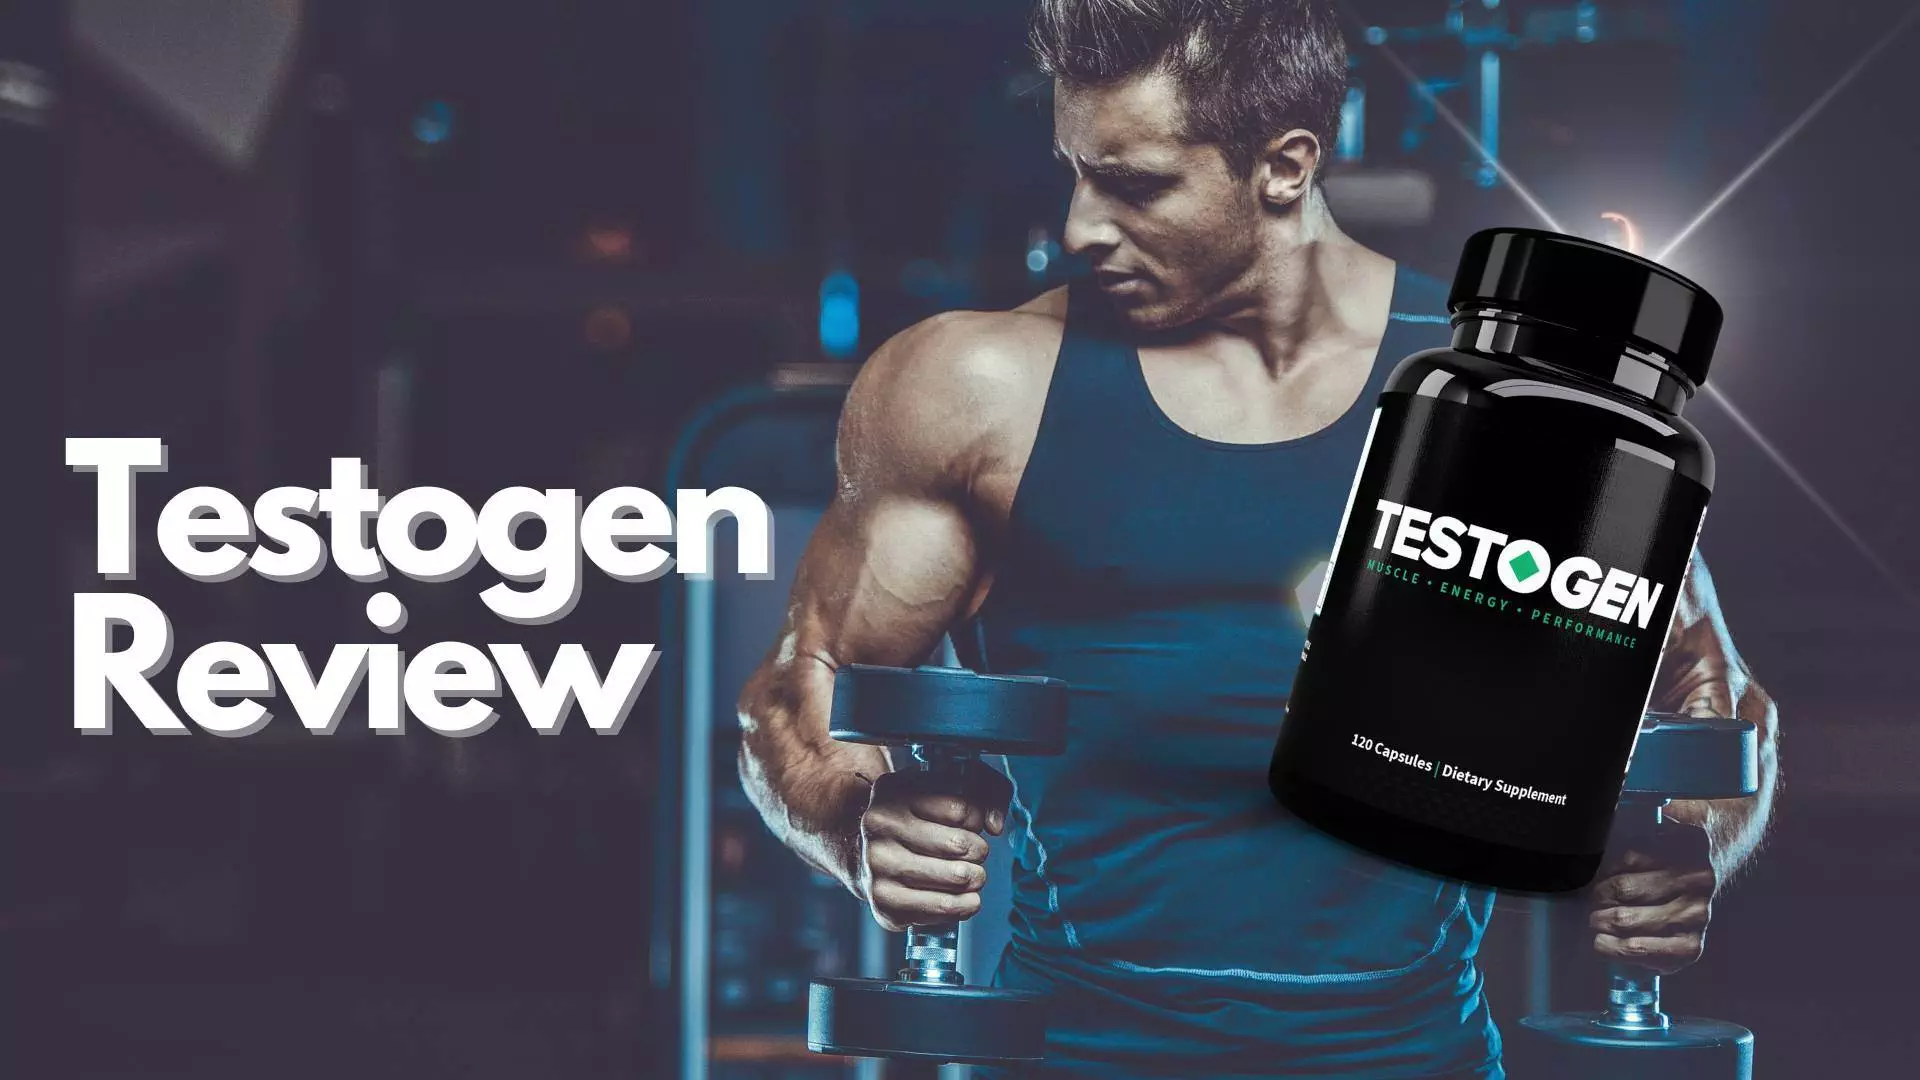 Testogen Review featured image